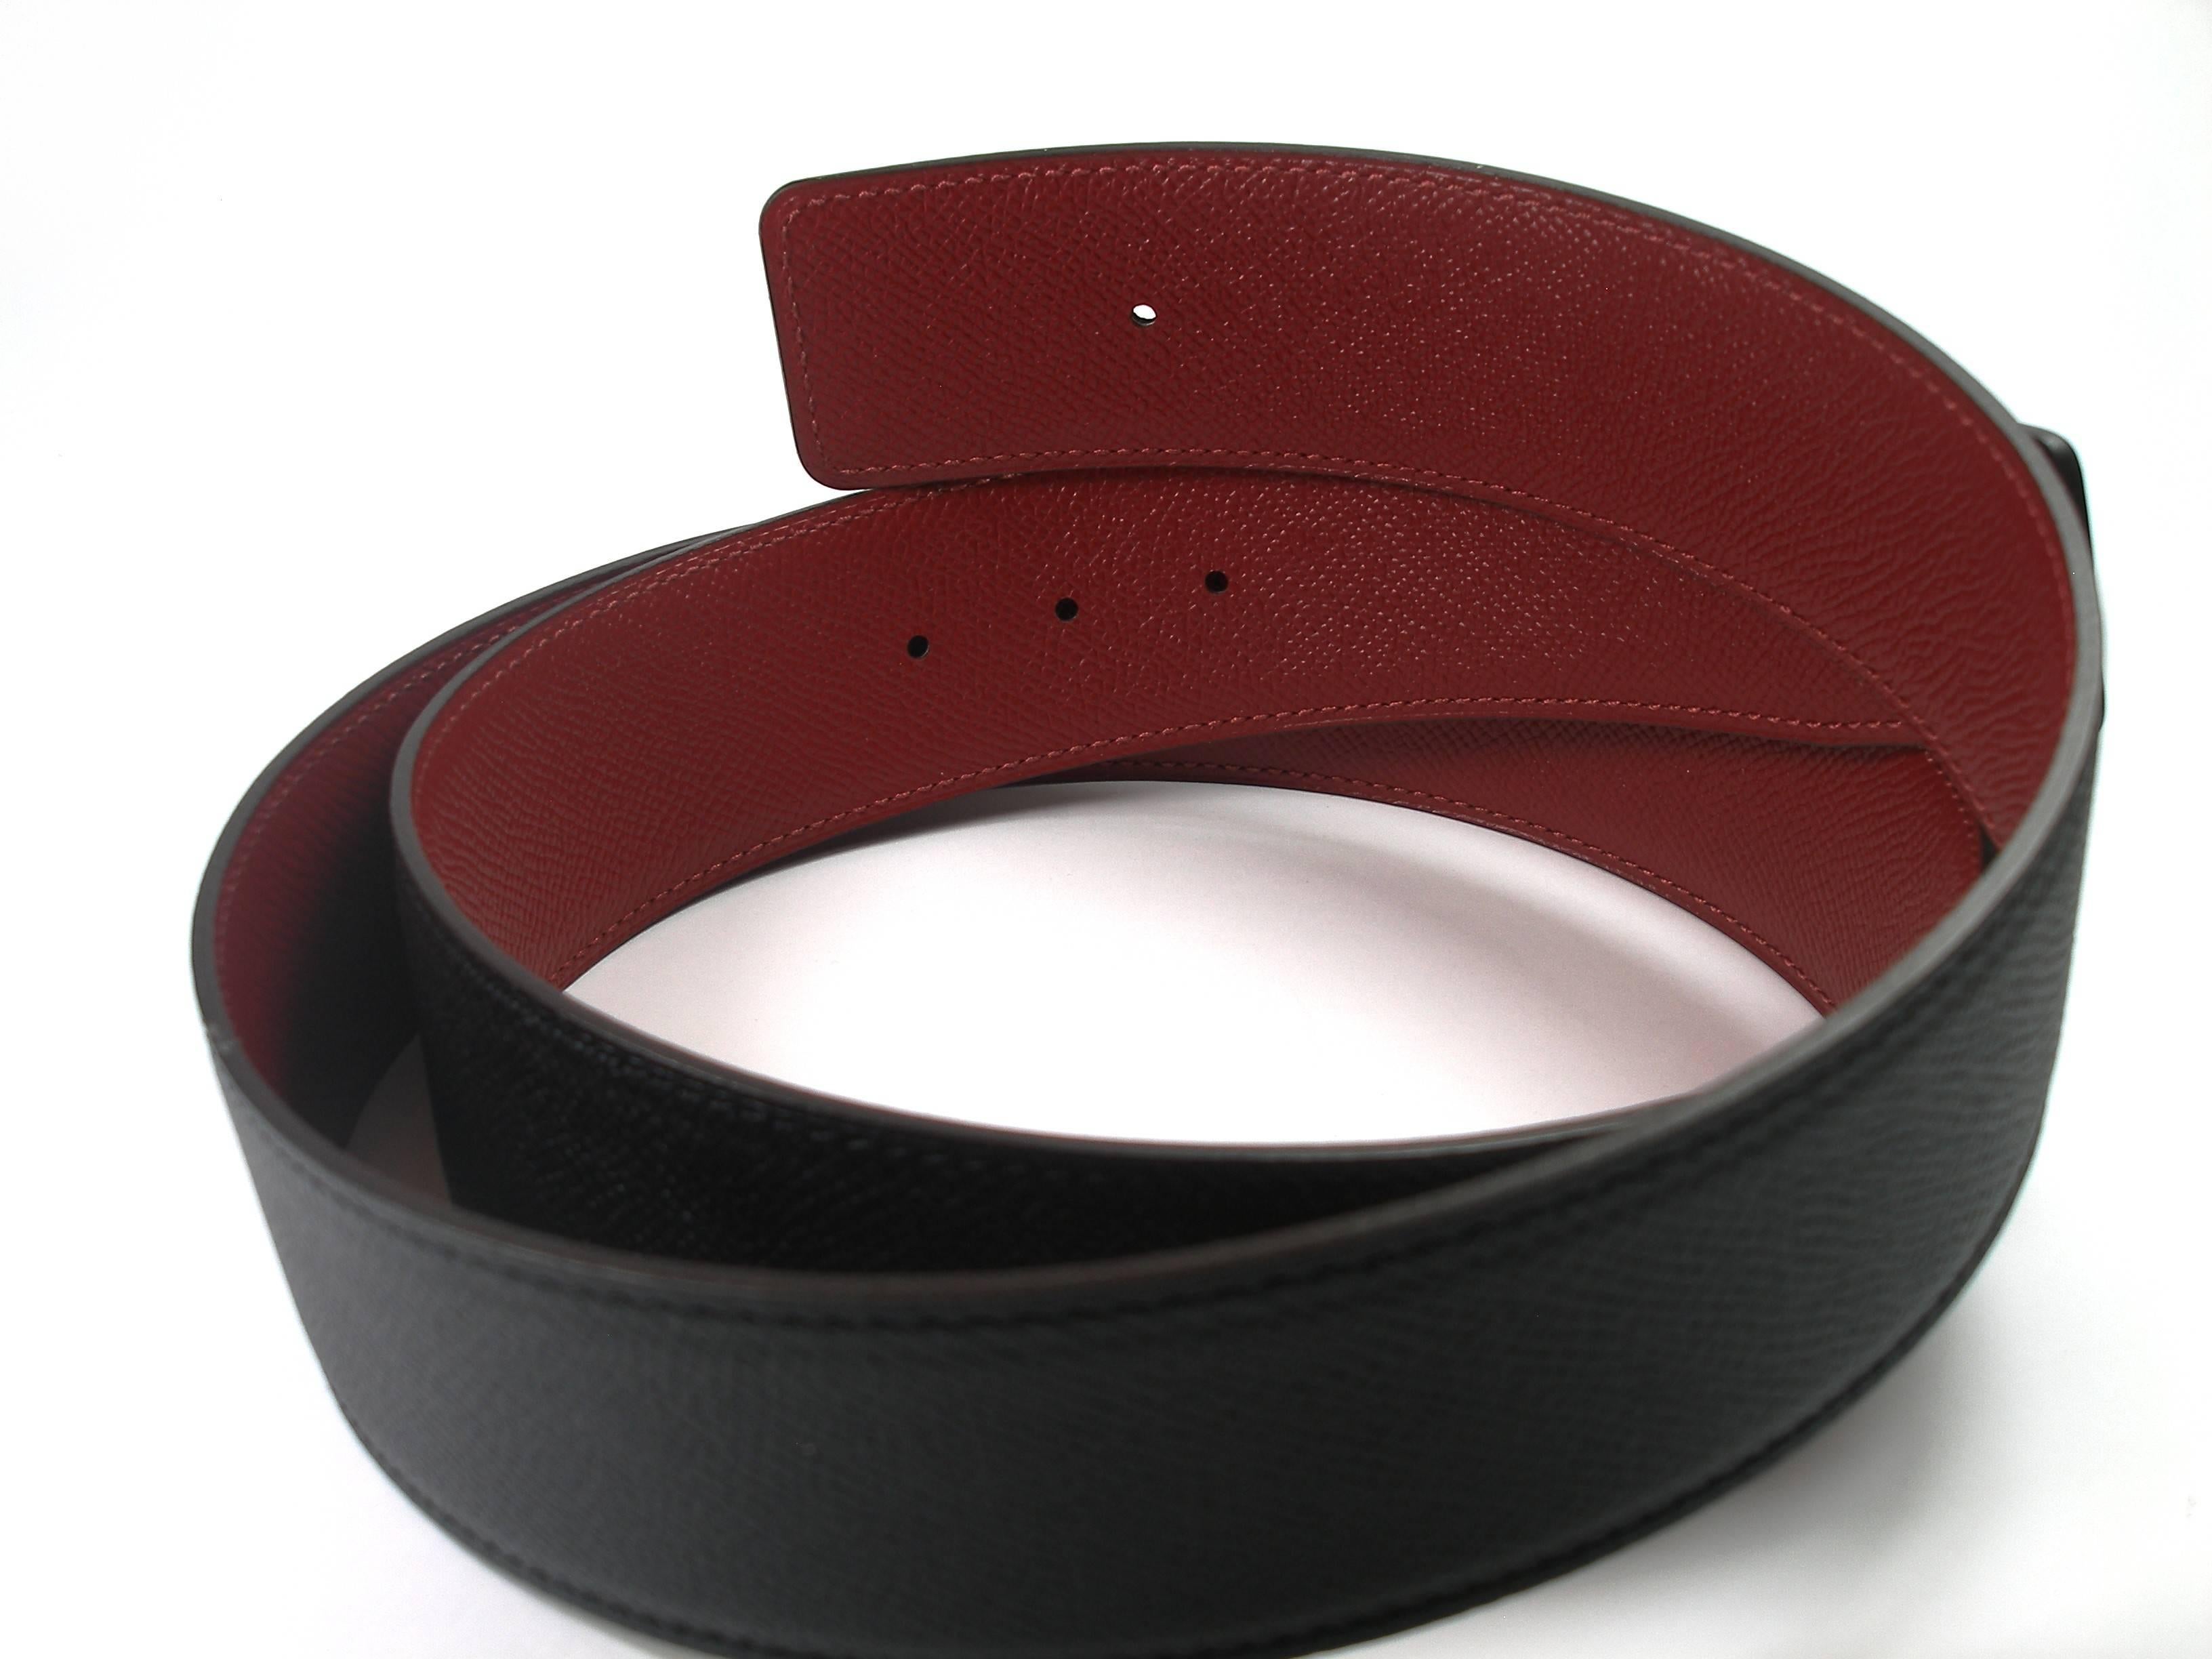 Hermès Leather belt strap for H buckle in 42 mm
ONLY STRAP 
Color : black reversible rouge grenat 
Epsom leather
Stamp Hermès Paris Made in France / 100 cm 
Its comes with Hermès shopping bag . 
Sorry no box 